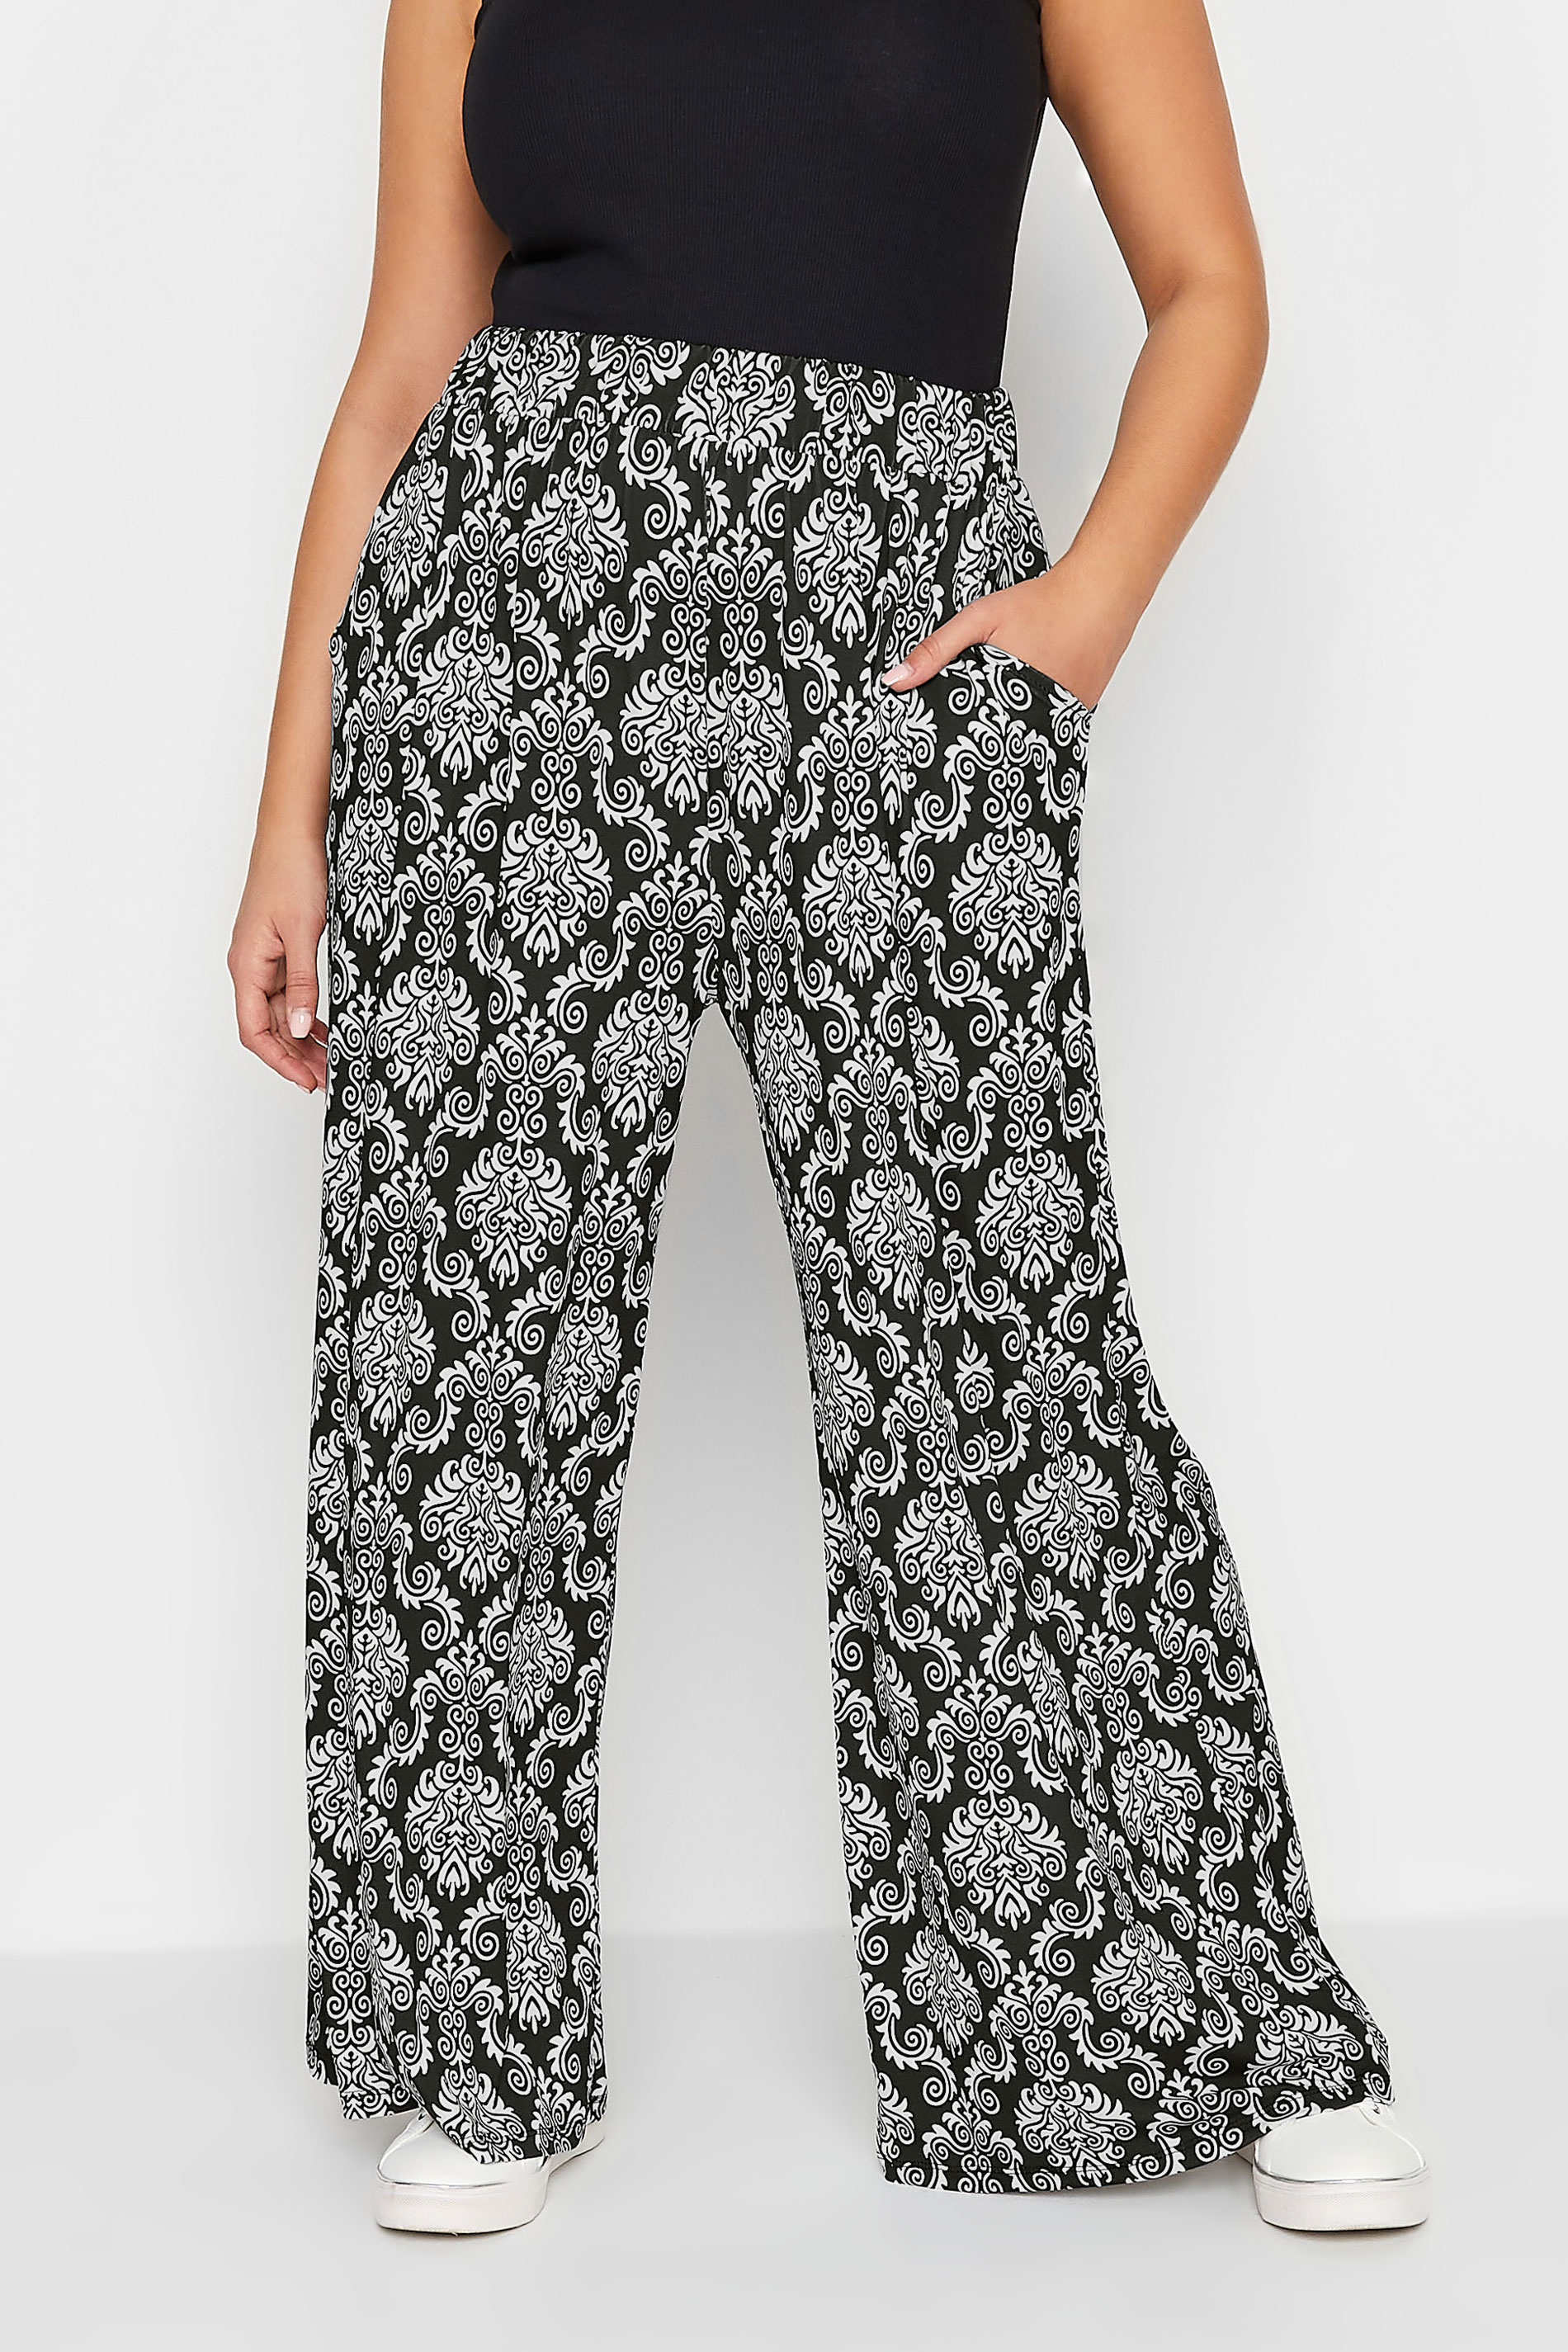 YOURS Plus Size Black Paisley Print Pull On Wide Leg Trousers | Yours Clothing 1